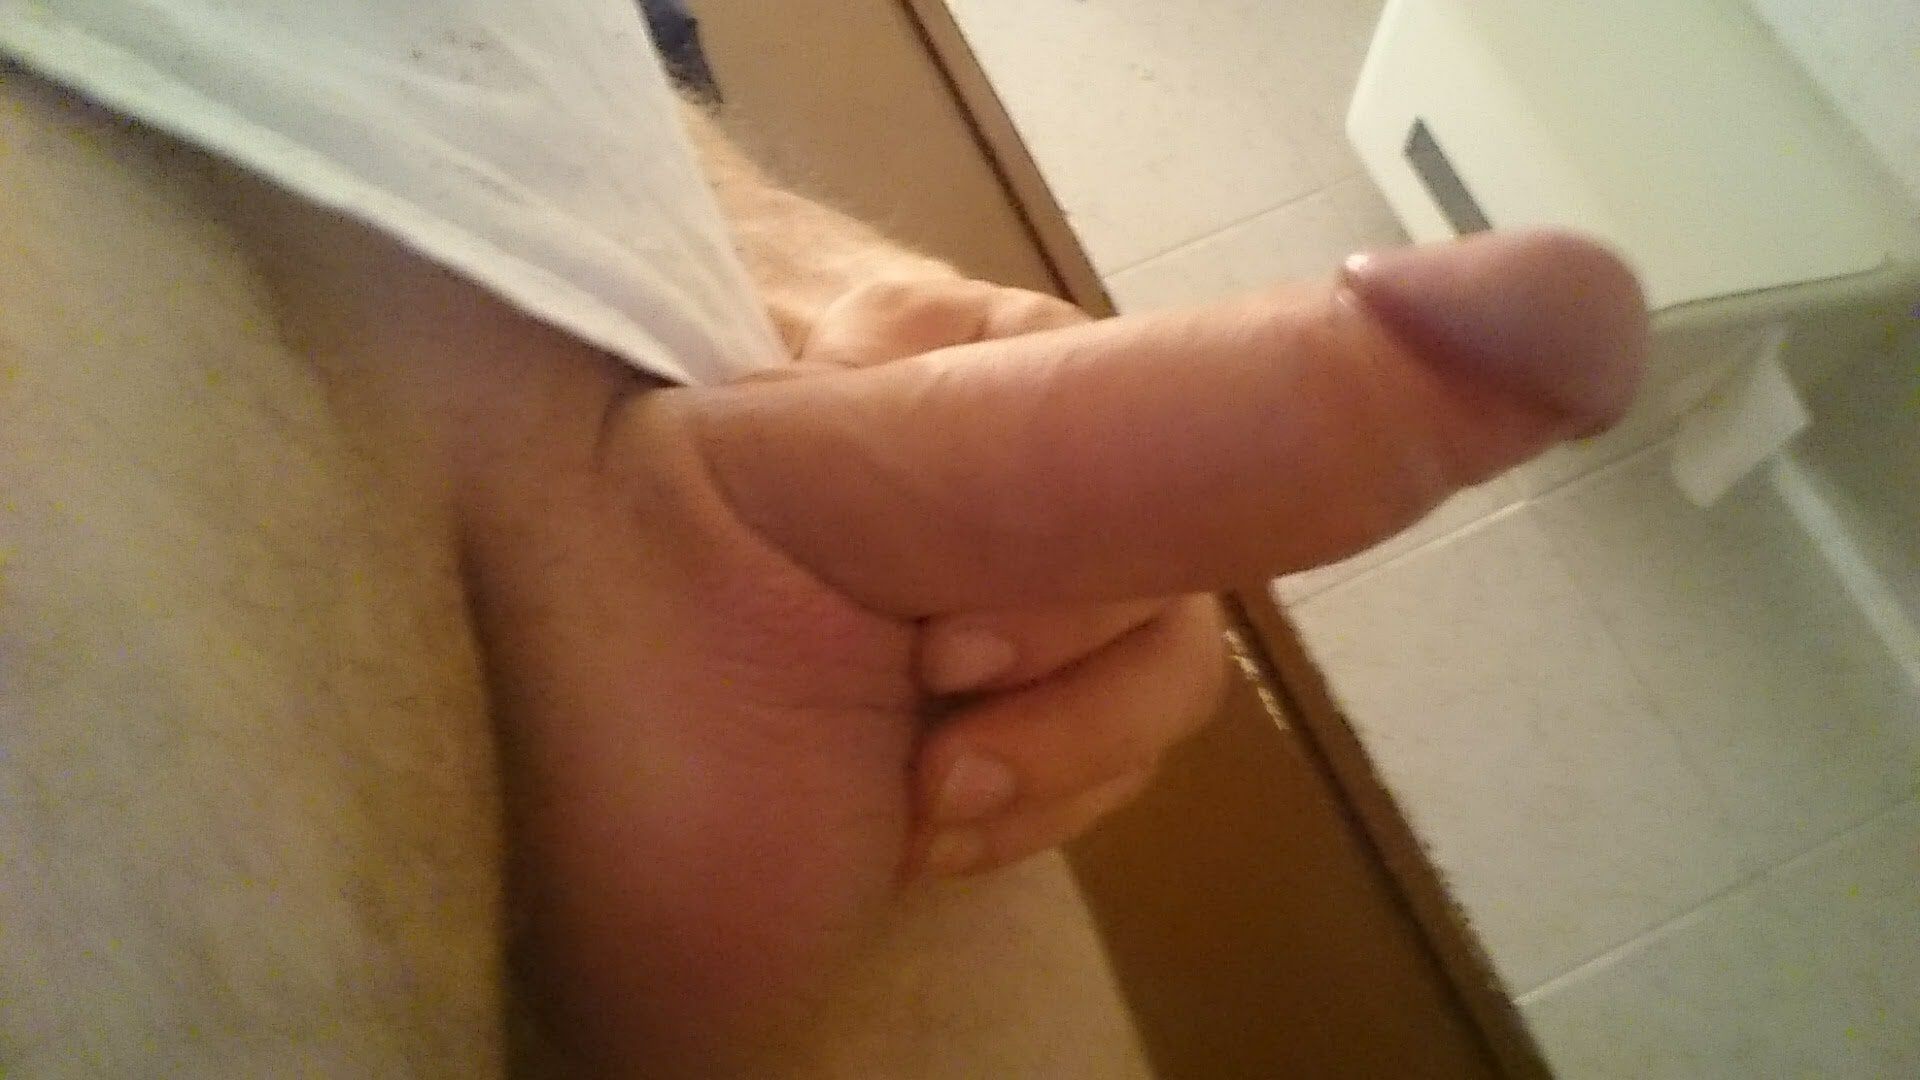 My cock #5